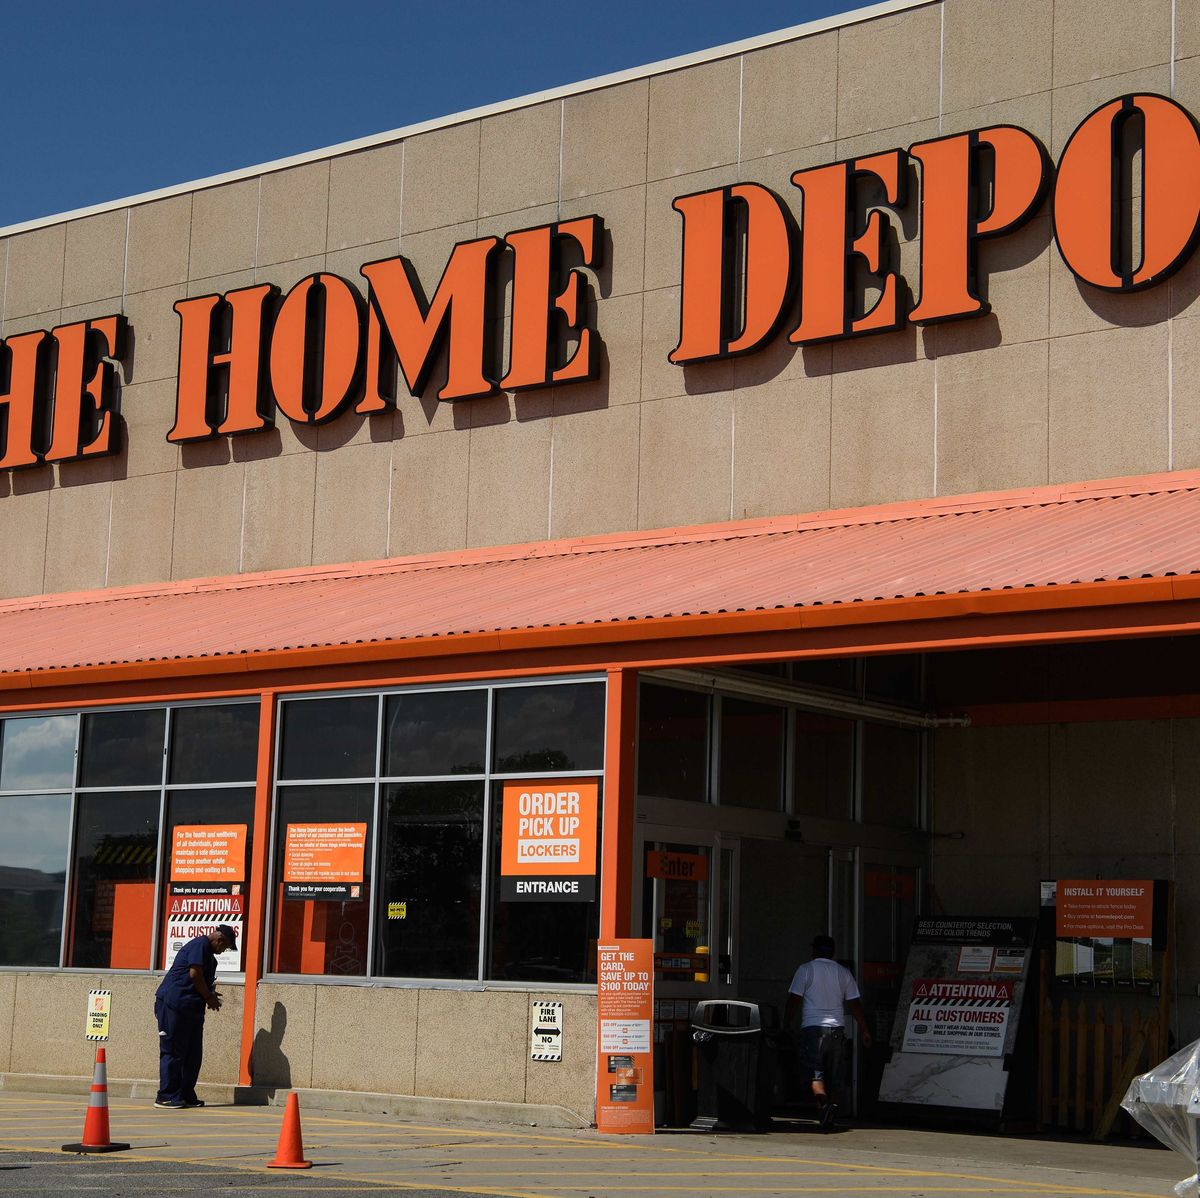 New Store Openings - The Home Depot